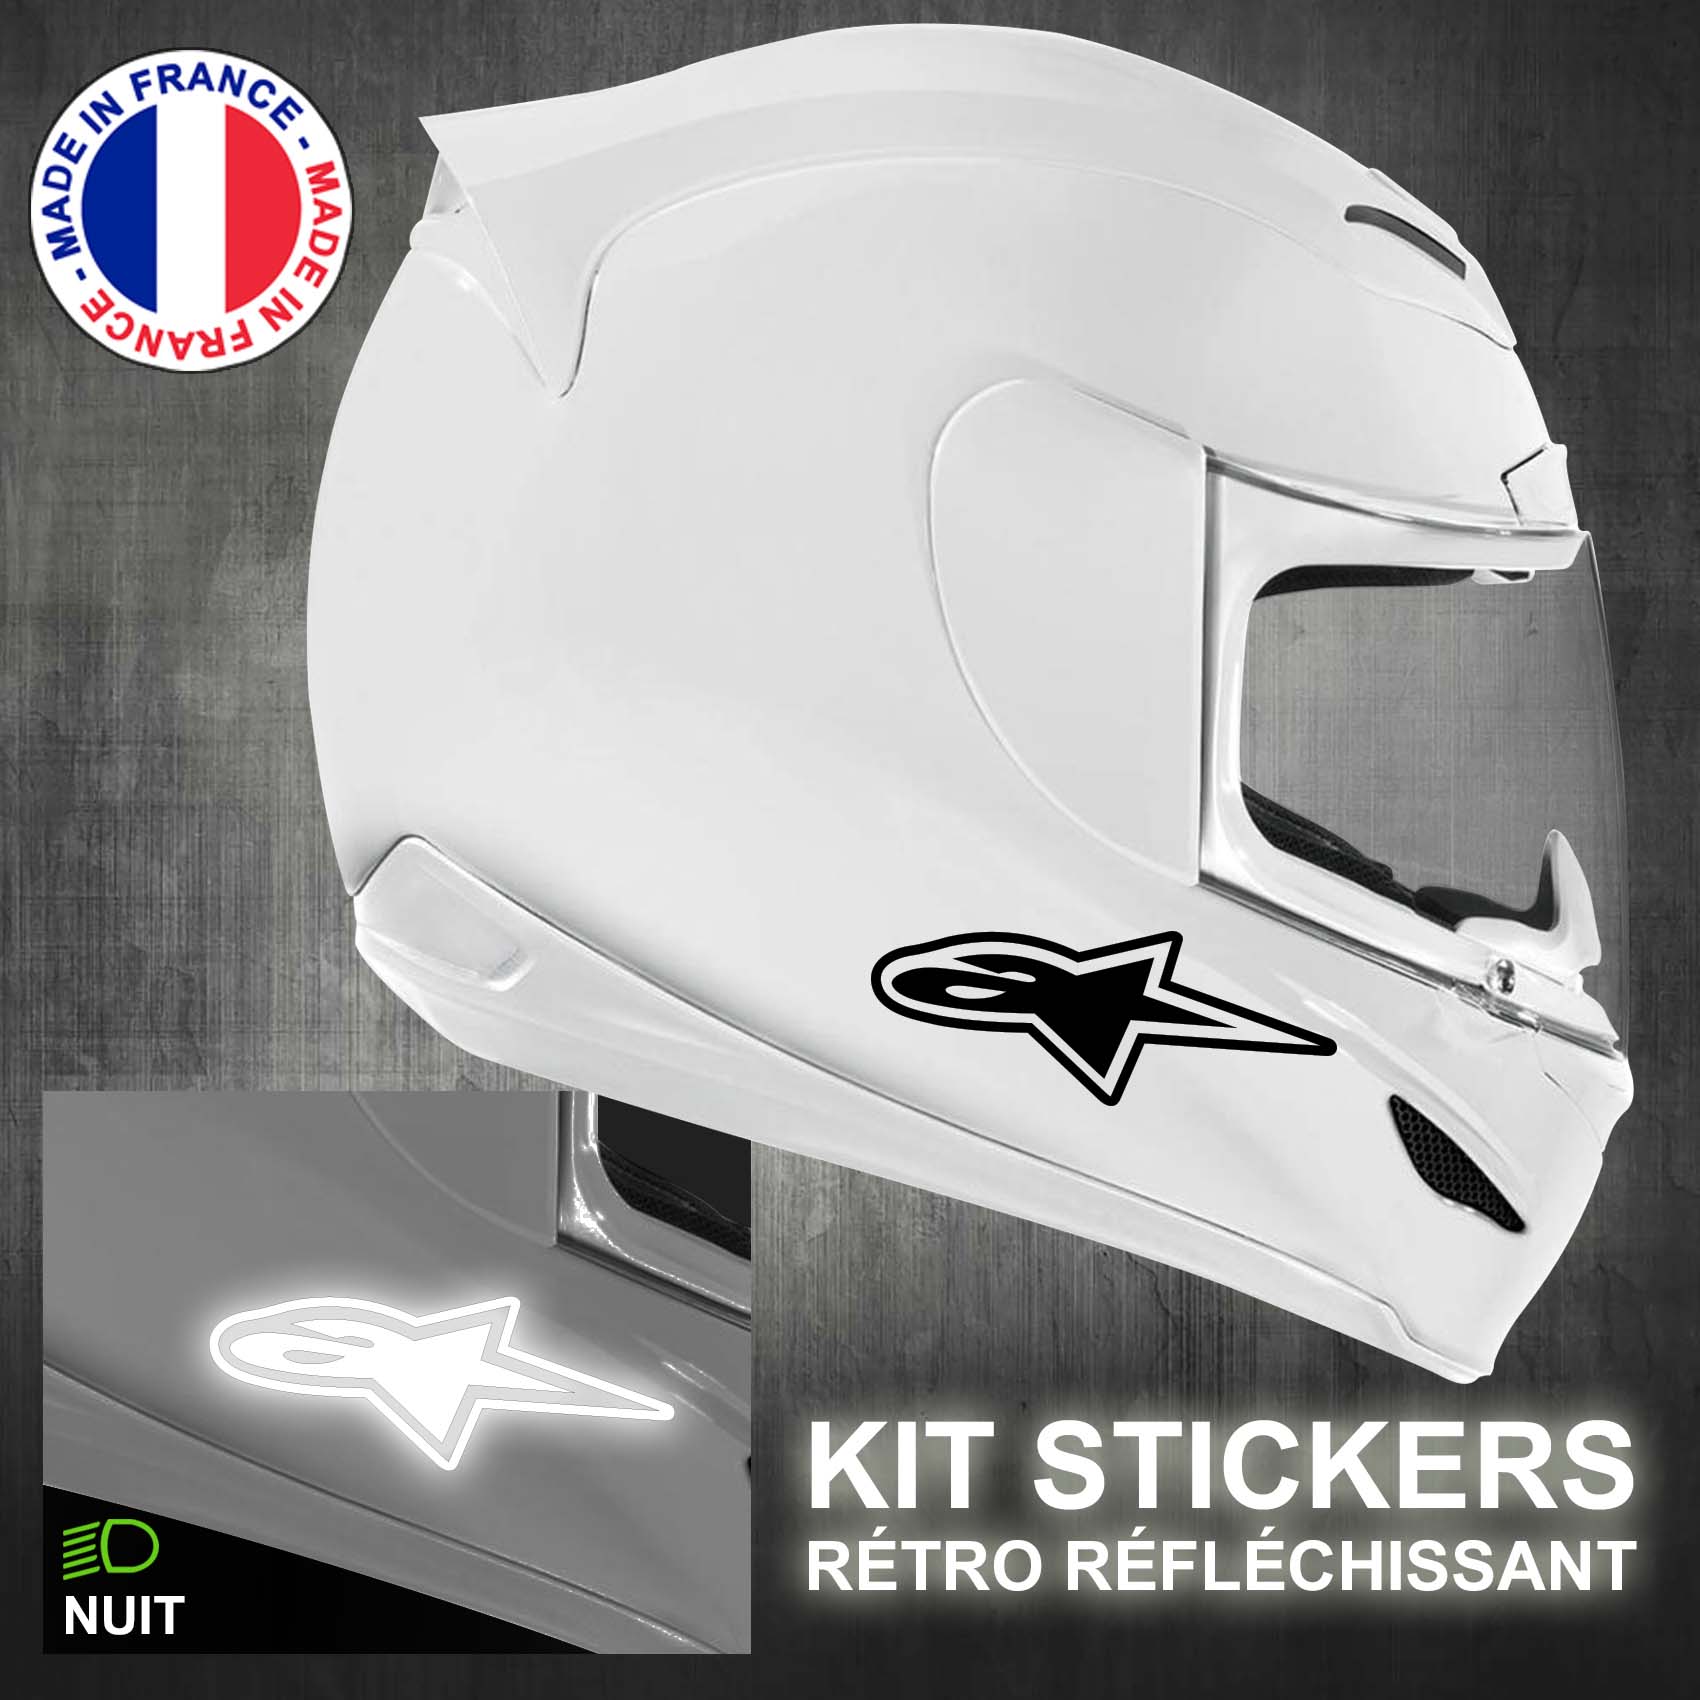 stickers-casque-moto-alpinestars-ref1-retro-reflechissant-autocollant-moto-velo-tuning-racing-route-sticker-casques-adhesif-scooter-nuit-securite-decals-personnalise-personnalisable-min